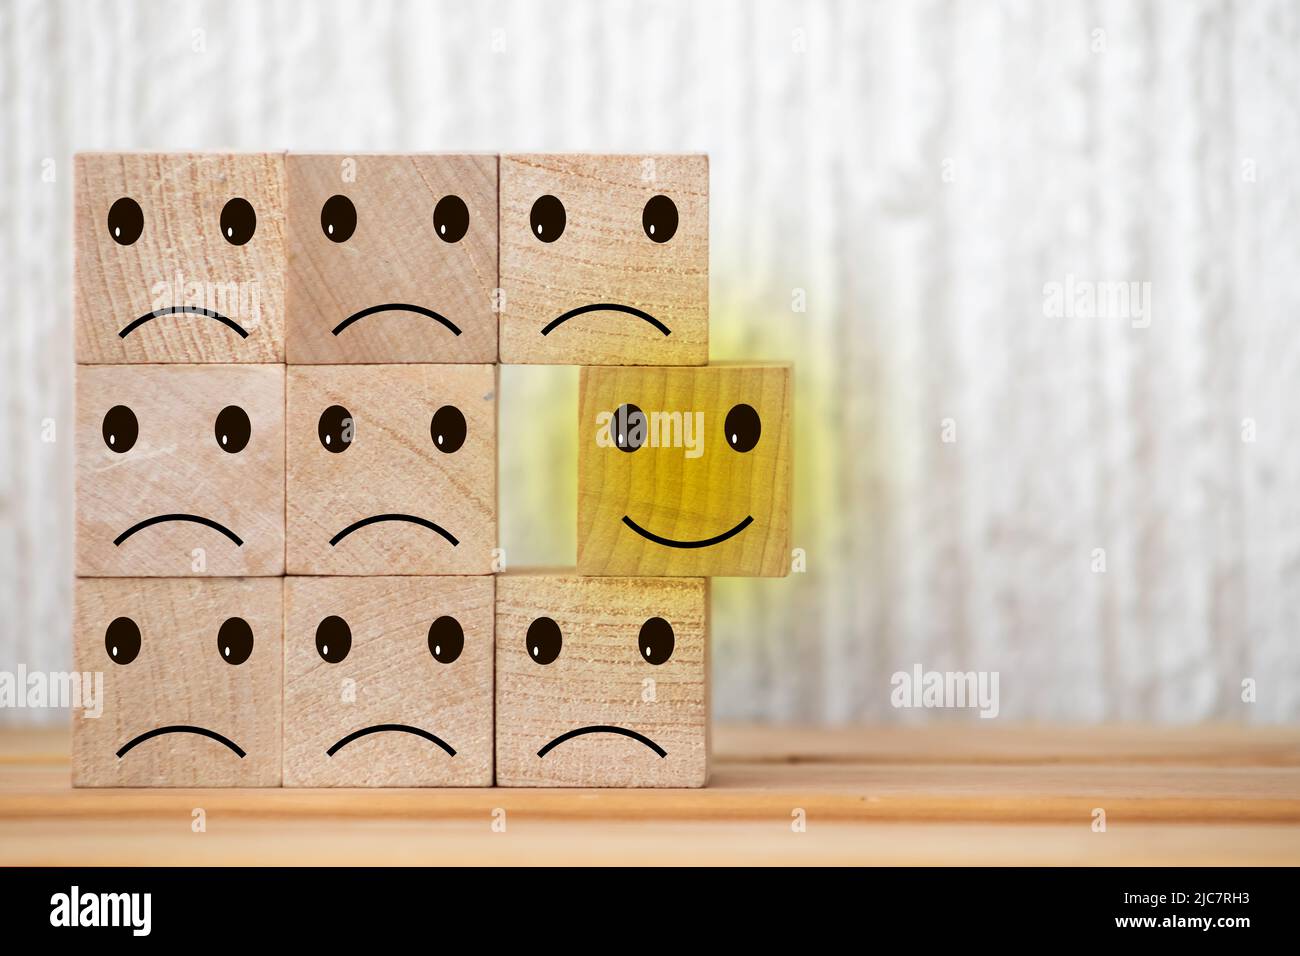 wooden cubes with smiling emoticons and sad one on wood table, blue background. Space for text. emotional state concept Stock Photo